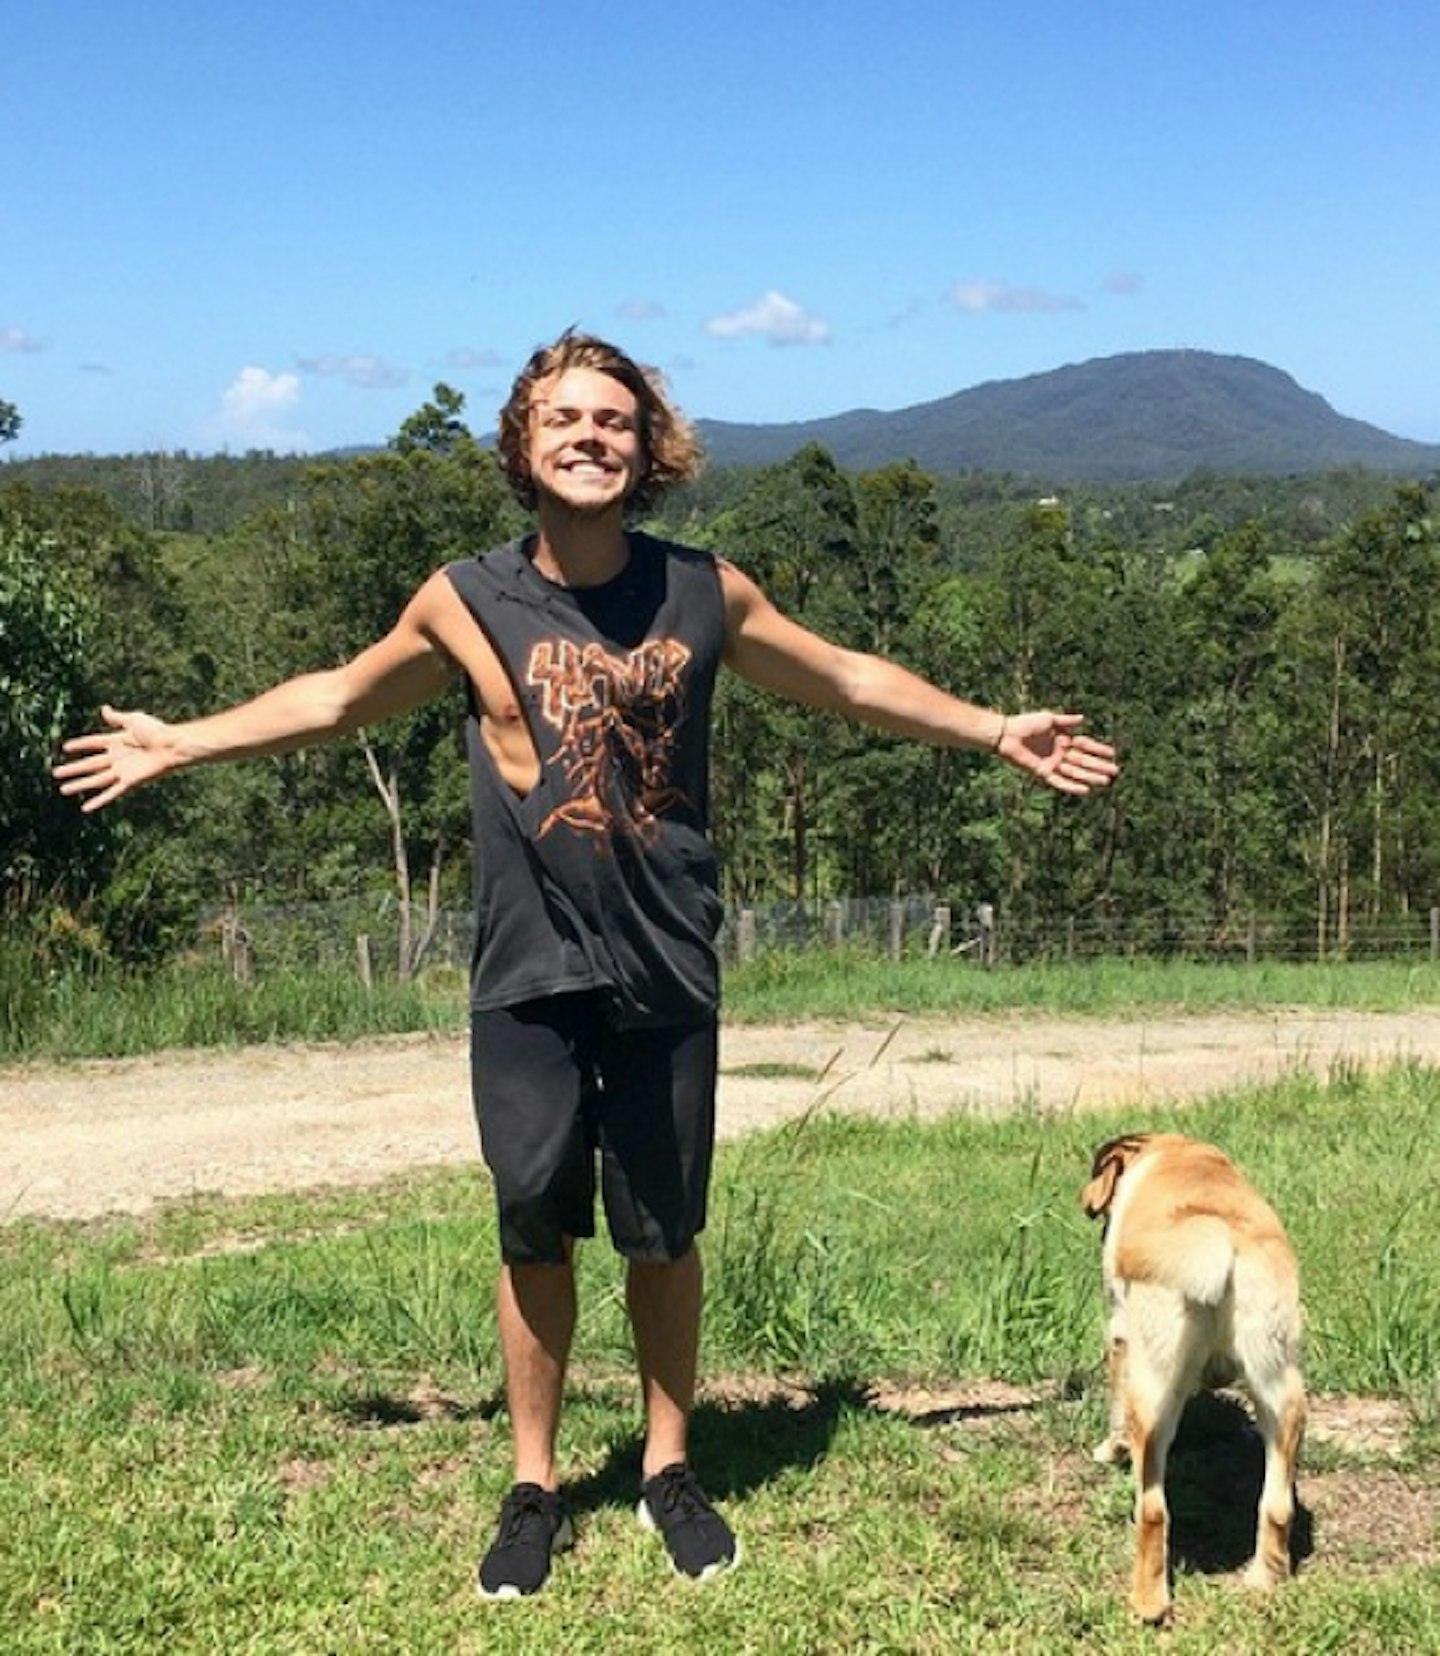 The hills are alive with the sound of Ashton (and his 'epic nipple)